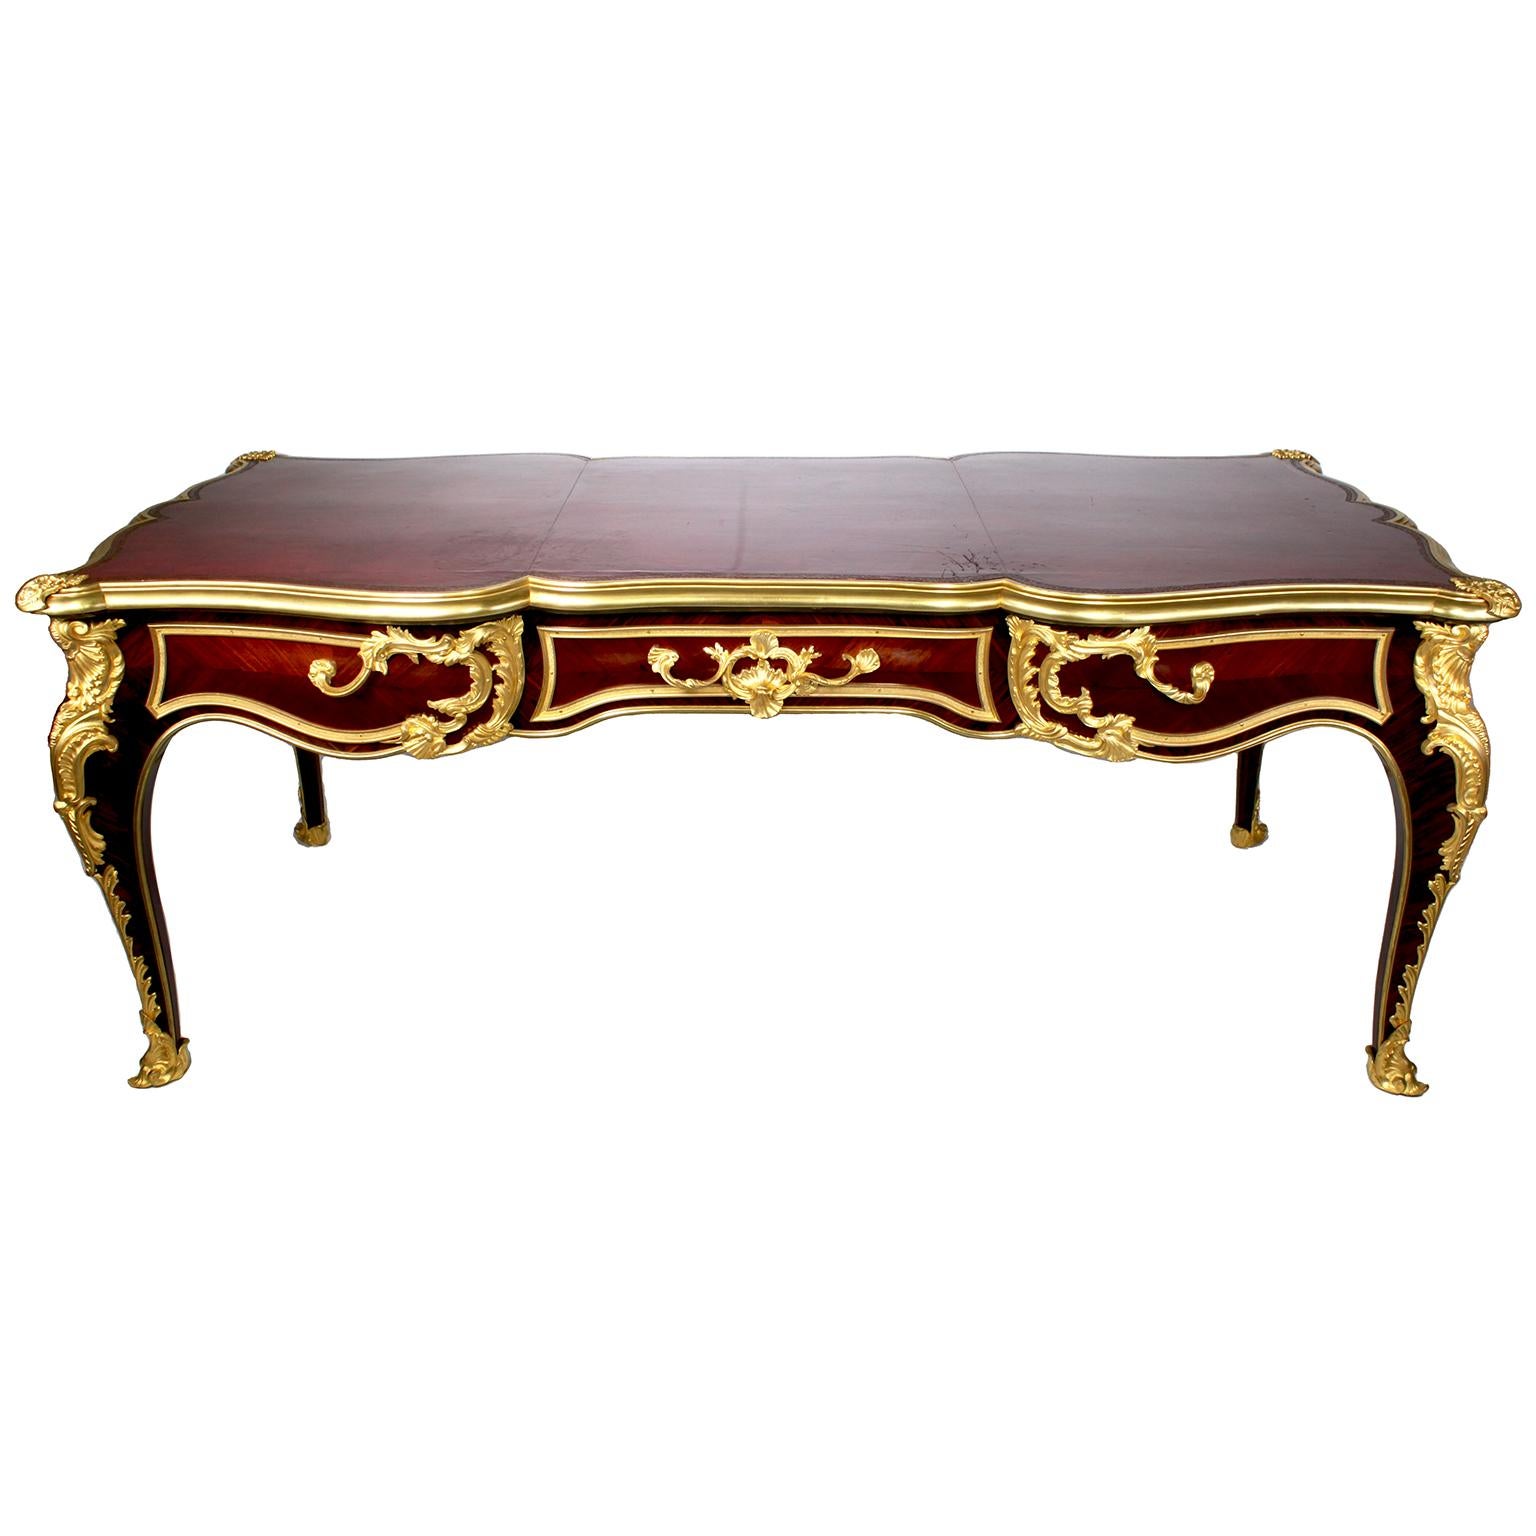 A Very Fine and Large French 19th Century Louis XV Style Ormolu Mounted Tulipwood Three-Drawer Bureau Plat - After a model by Joseph Baumhauer (died 1772) - Attributed to Paul Sormani (French-Italian 1817-1877). The serpentine shaped rectangular top